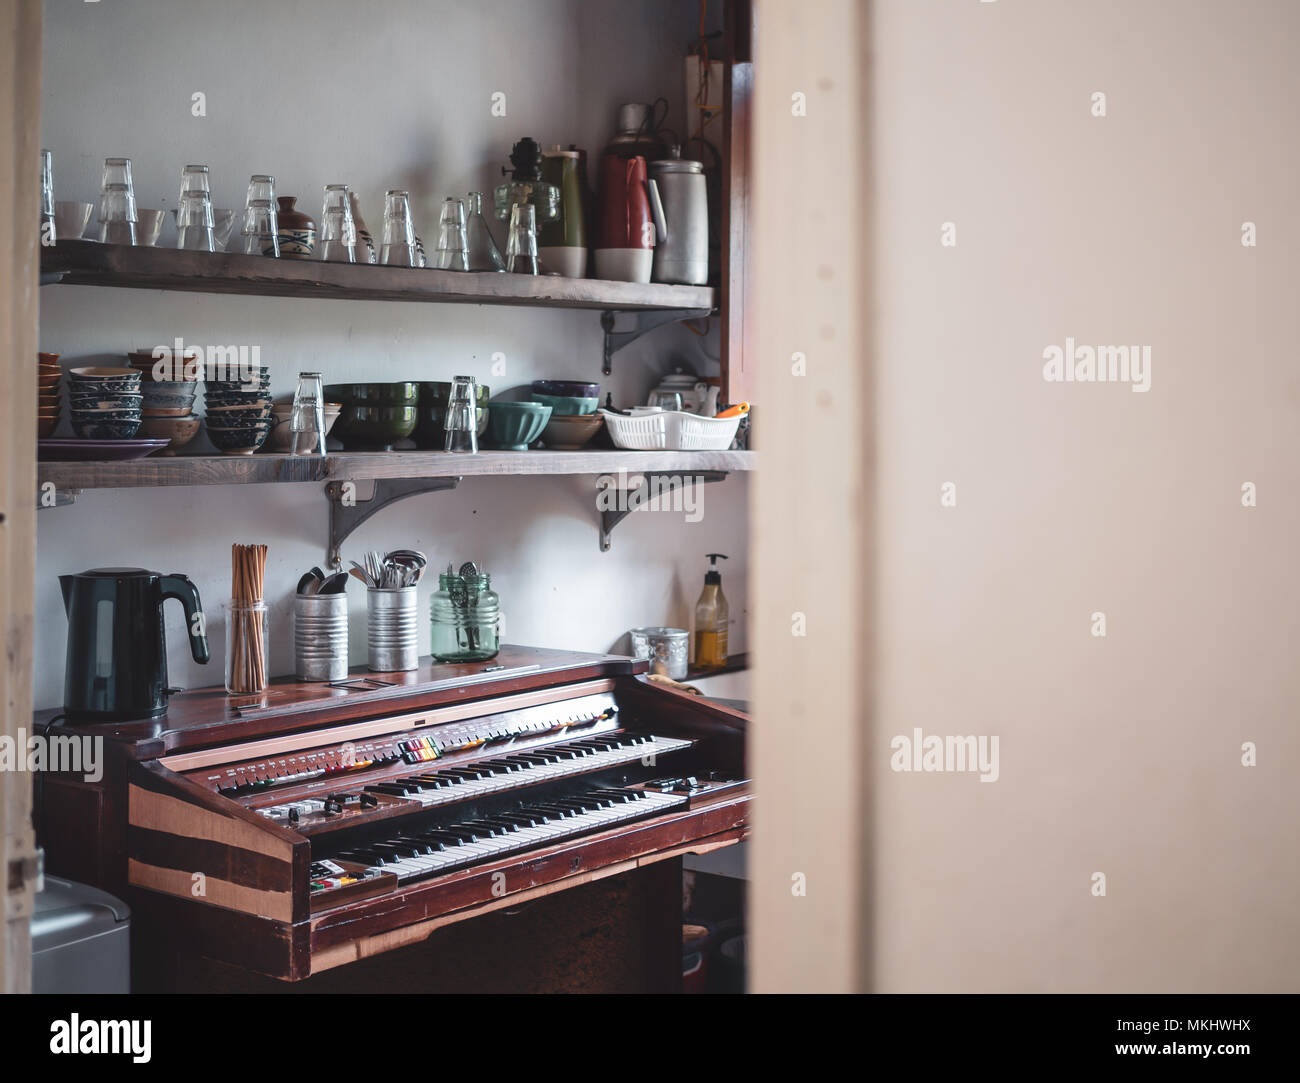 Kitchen Room, Inside with Vintage Electone Keyboard and Local Home Kitchenware, Glasses, Ceramic Cup, Spoons, Forks, Bowls on  Wooden Shelves Stock Photo